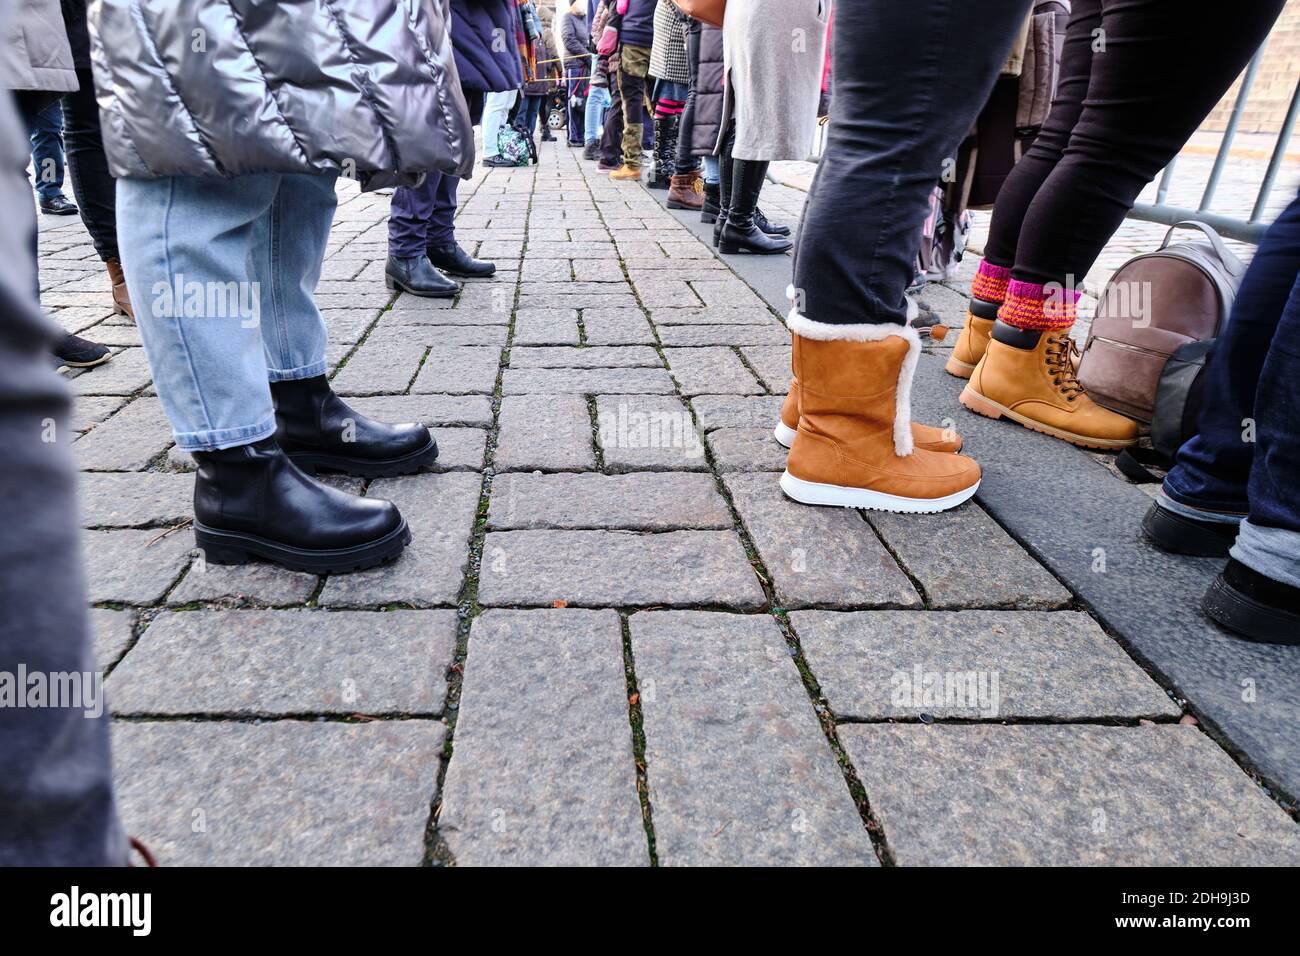 Self-distancing people on the public celebration on the street during the COVID-19 Pandemic. Stock Photo